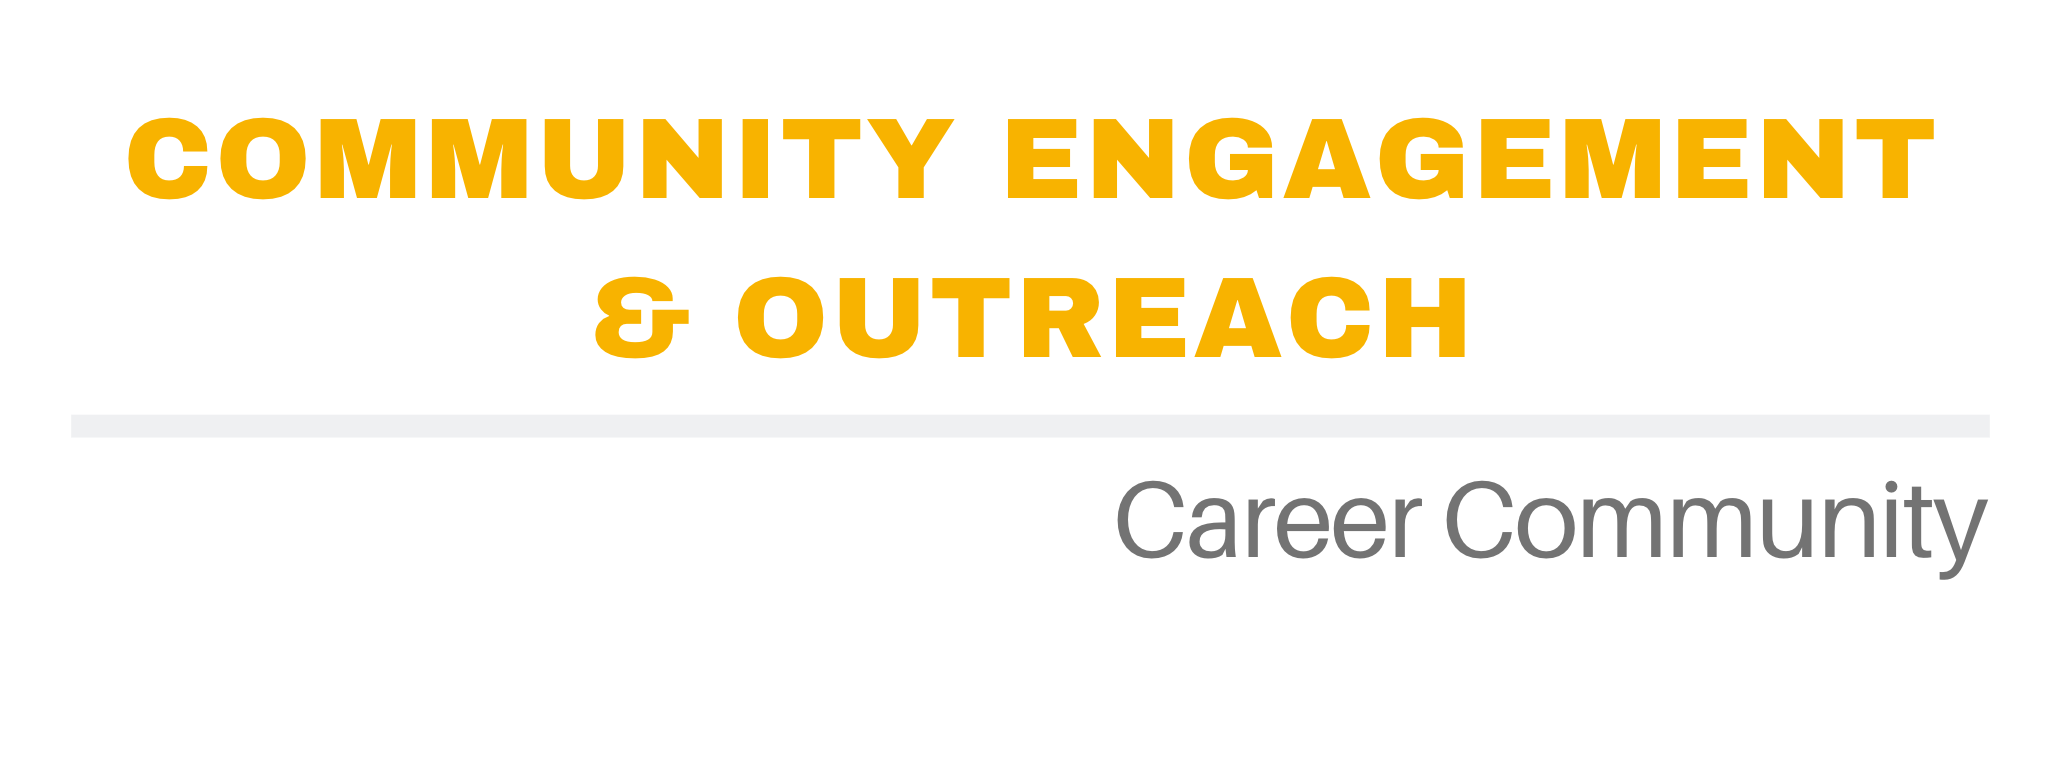 Community Engagement and Outreach logo